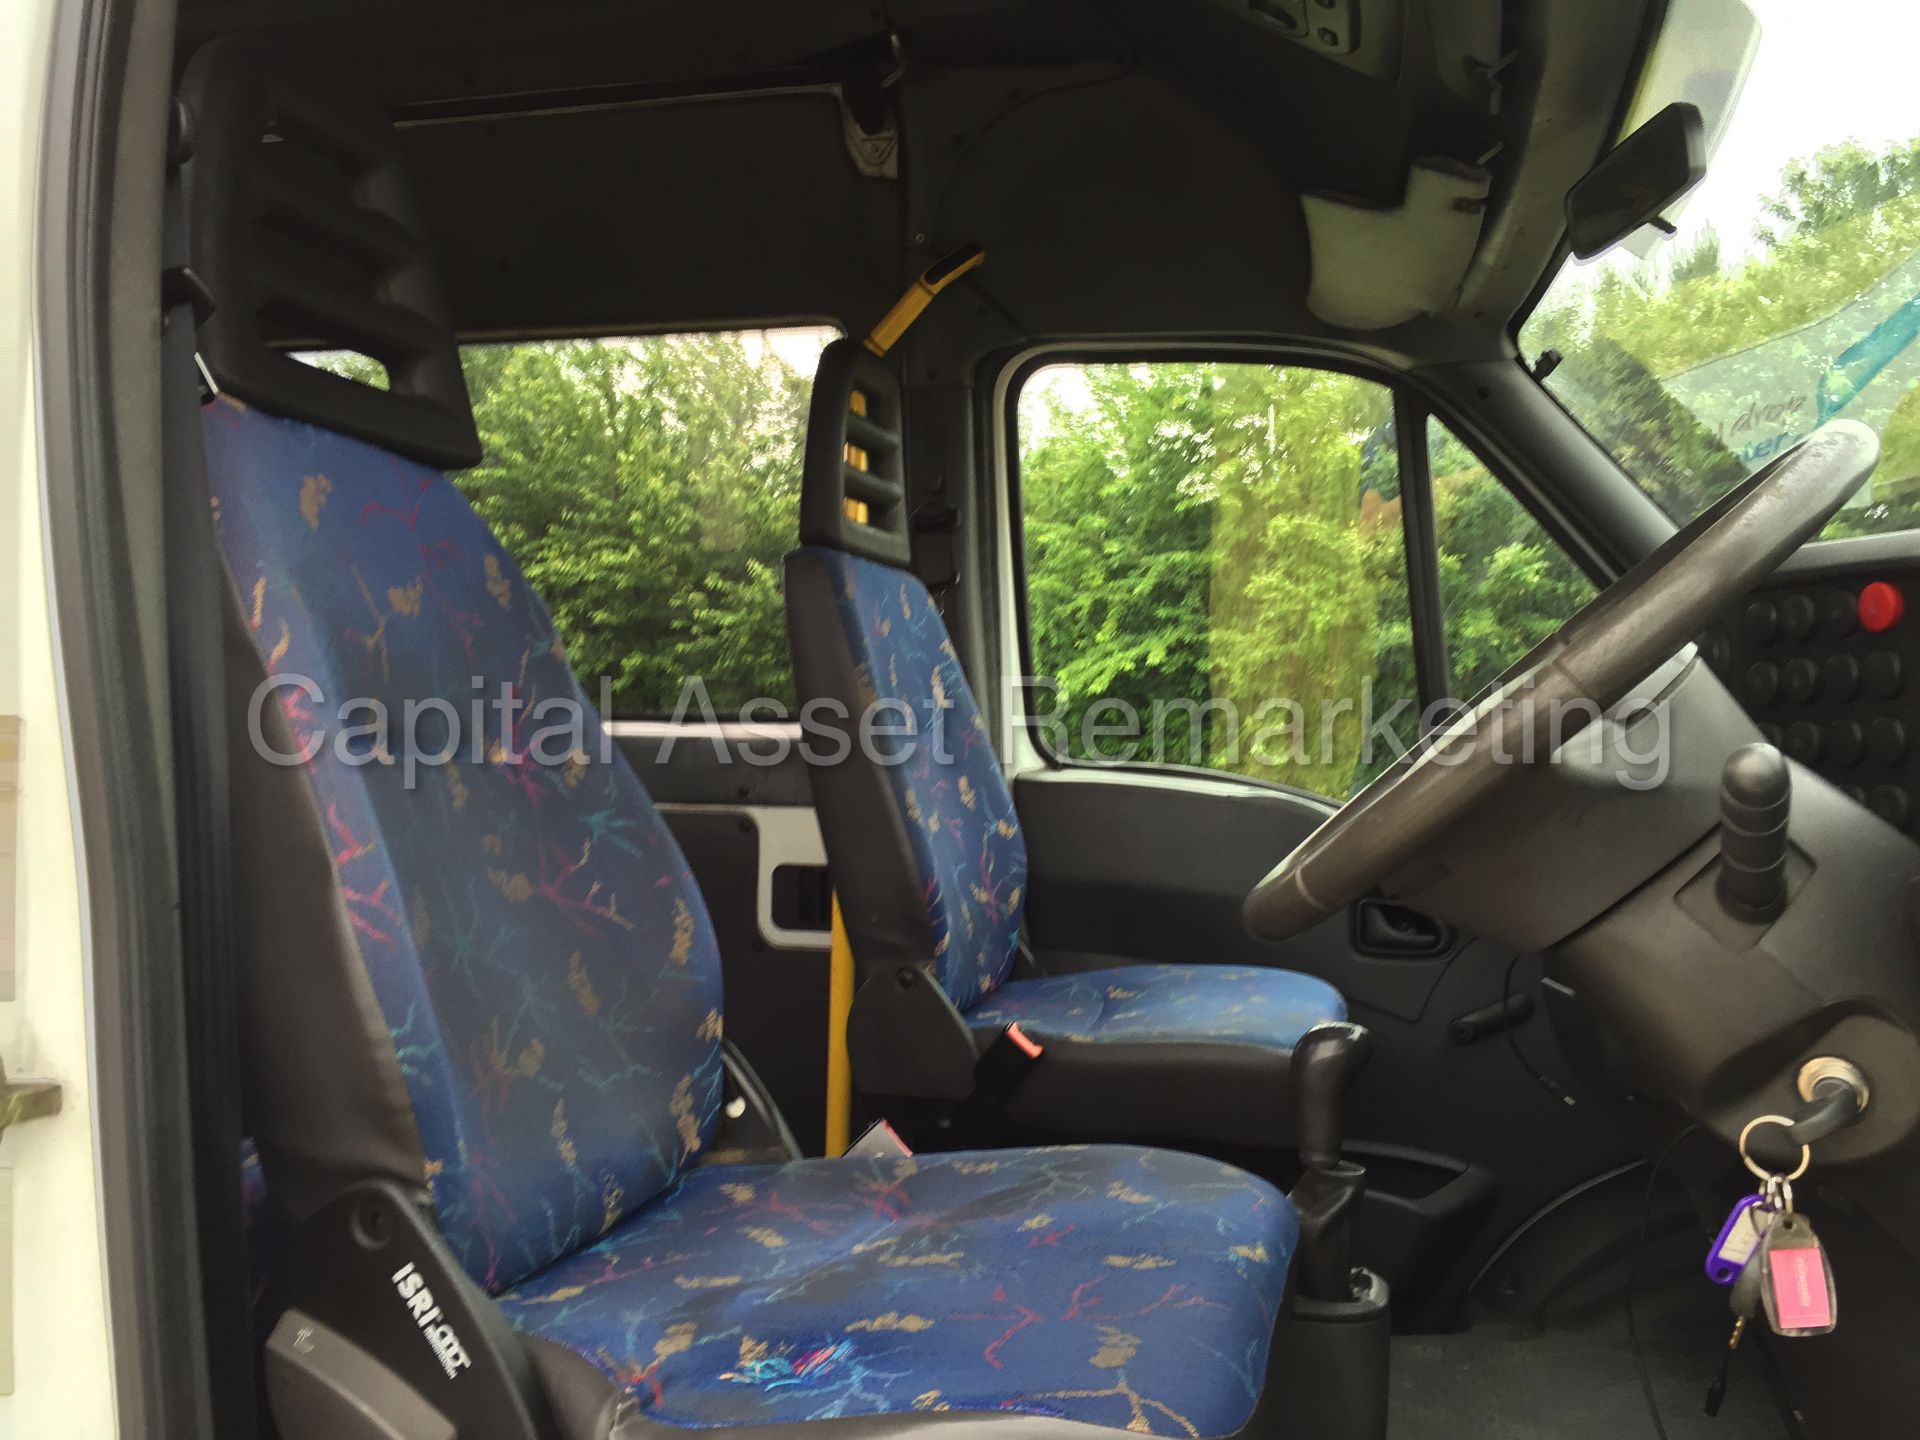 (on sale) IVECO DAILY 35S13 '14 SEATER MINI-BUS' (2003 - 03 REG) '2.3 DIESEL - 6 SPEED' (NO VAT) - Image 12 of 23